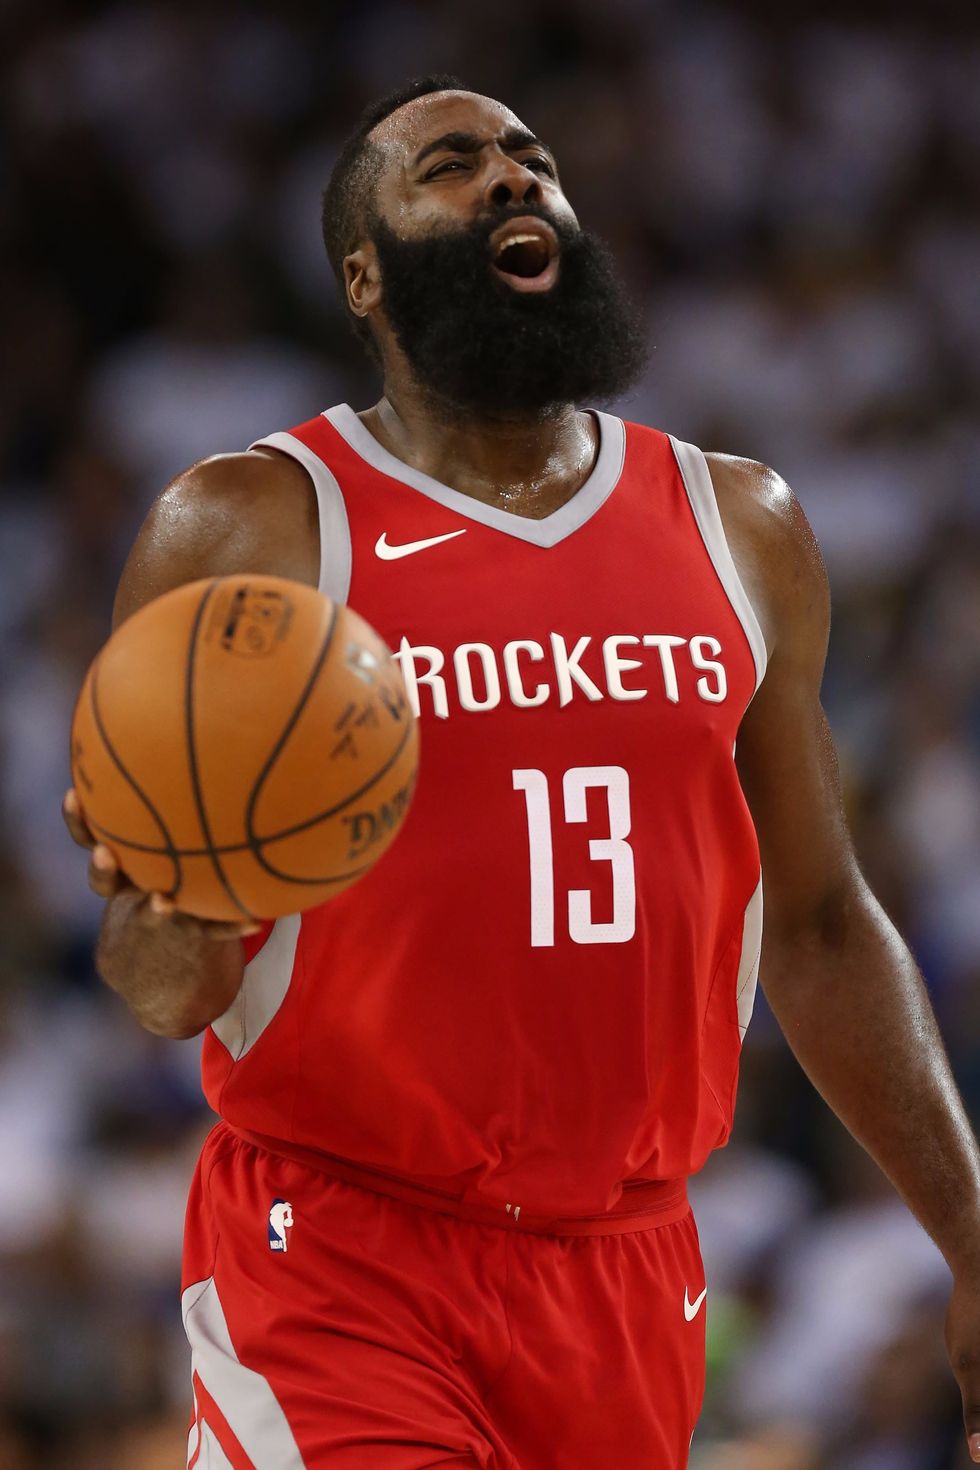 Rockets clinch best record, but are not playing well